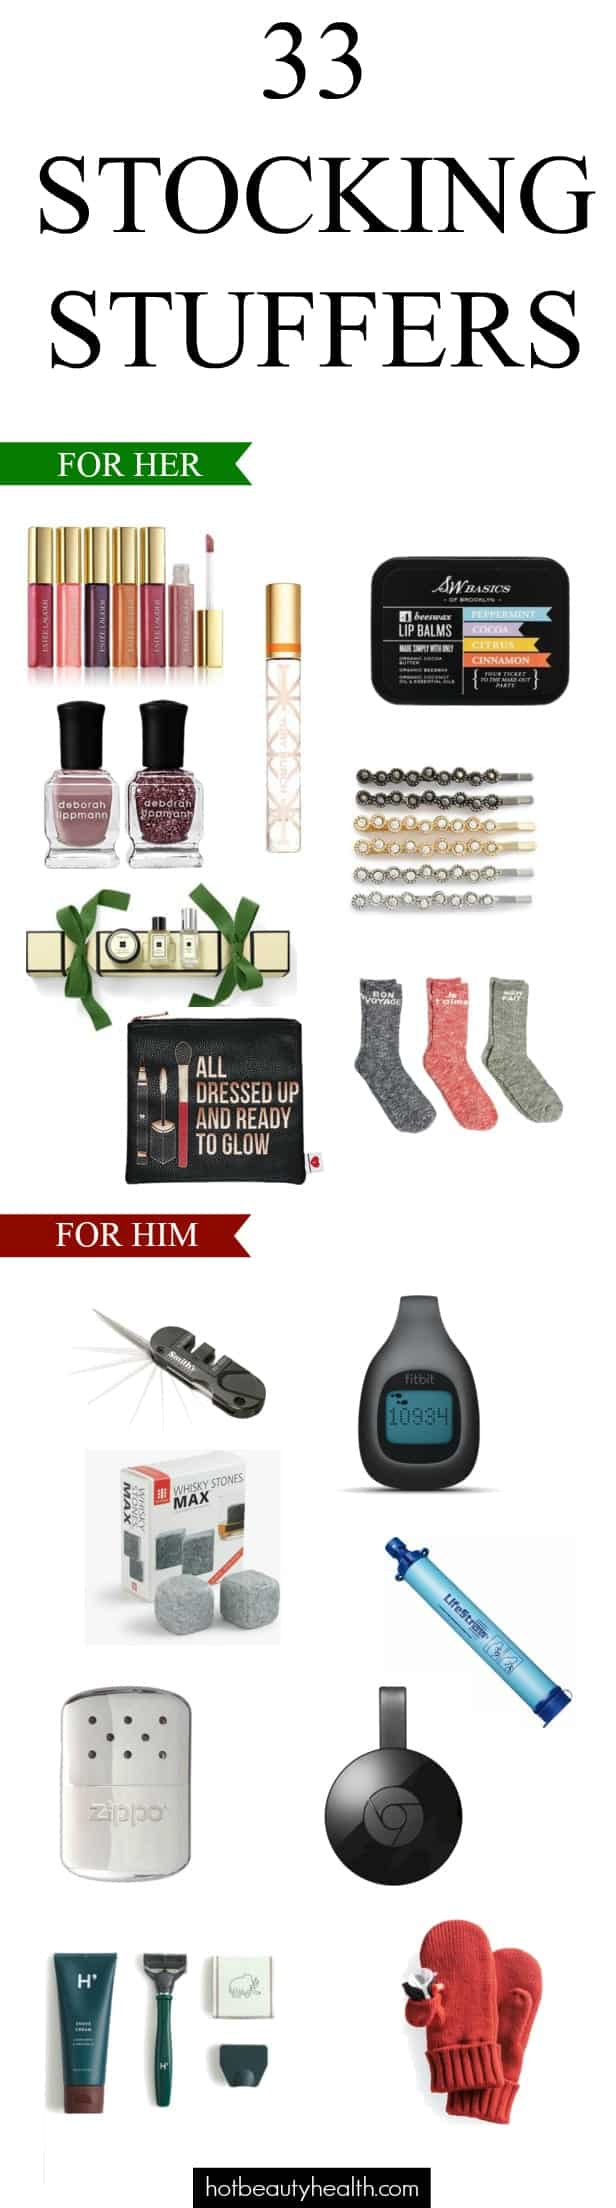 stocking stuffers for him and her